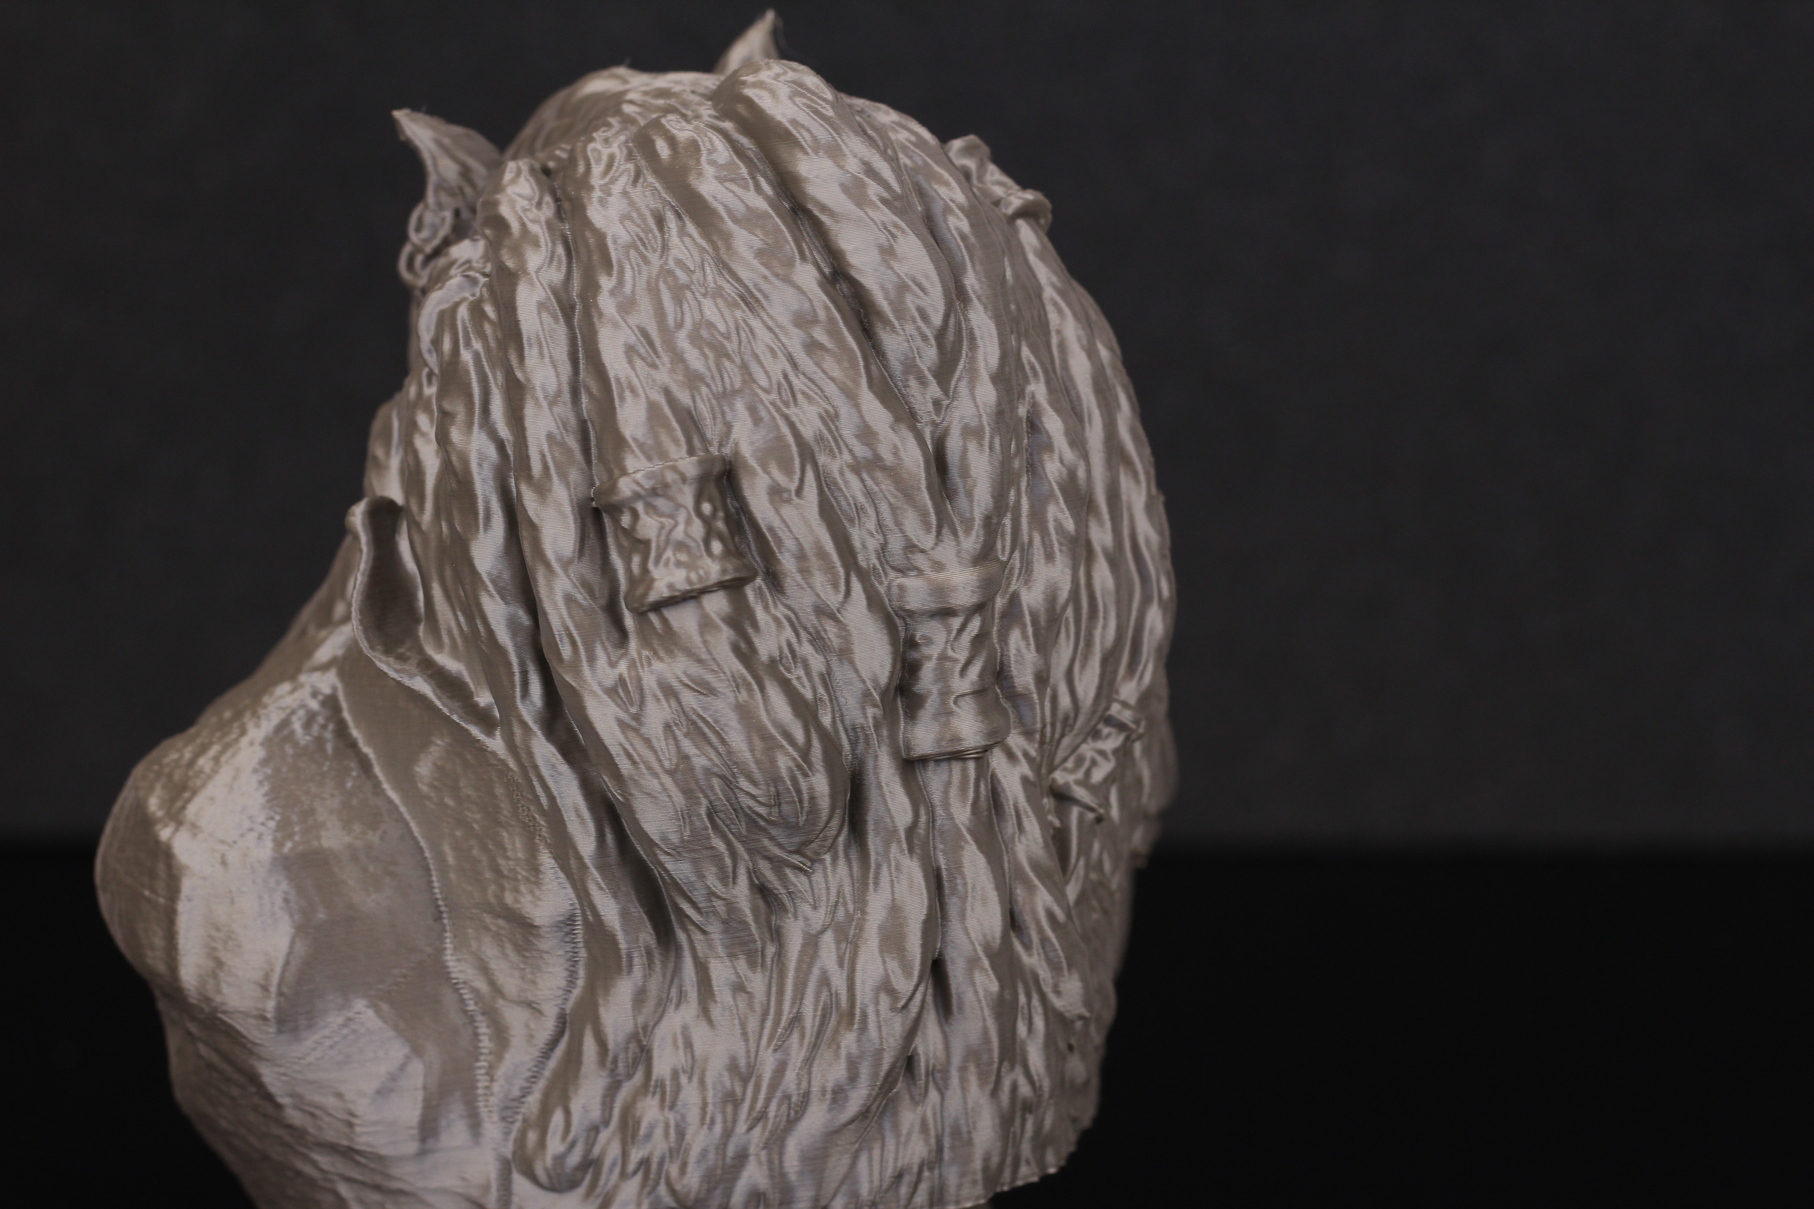 Worgen Bust printed on RatRig V Core 3 3 | RatRig V-Core 3 Review: Premium CoreXY 3D Printer Kit